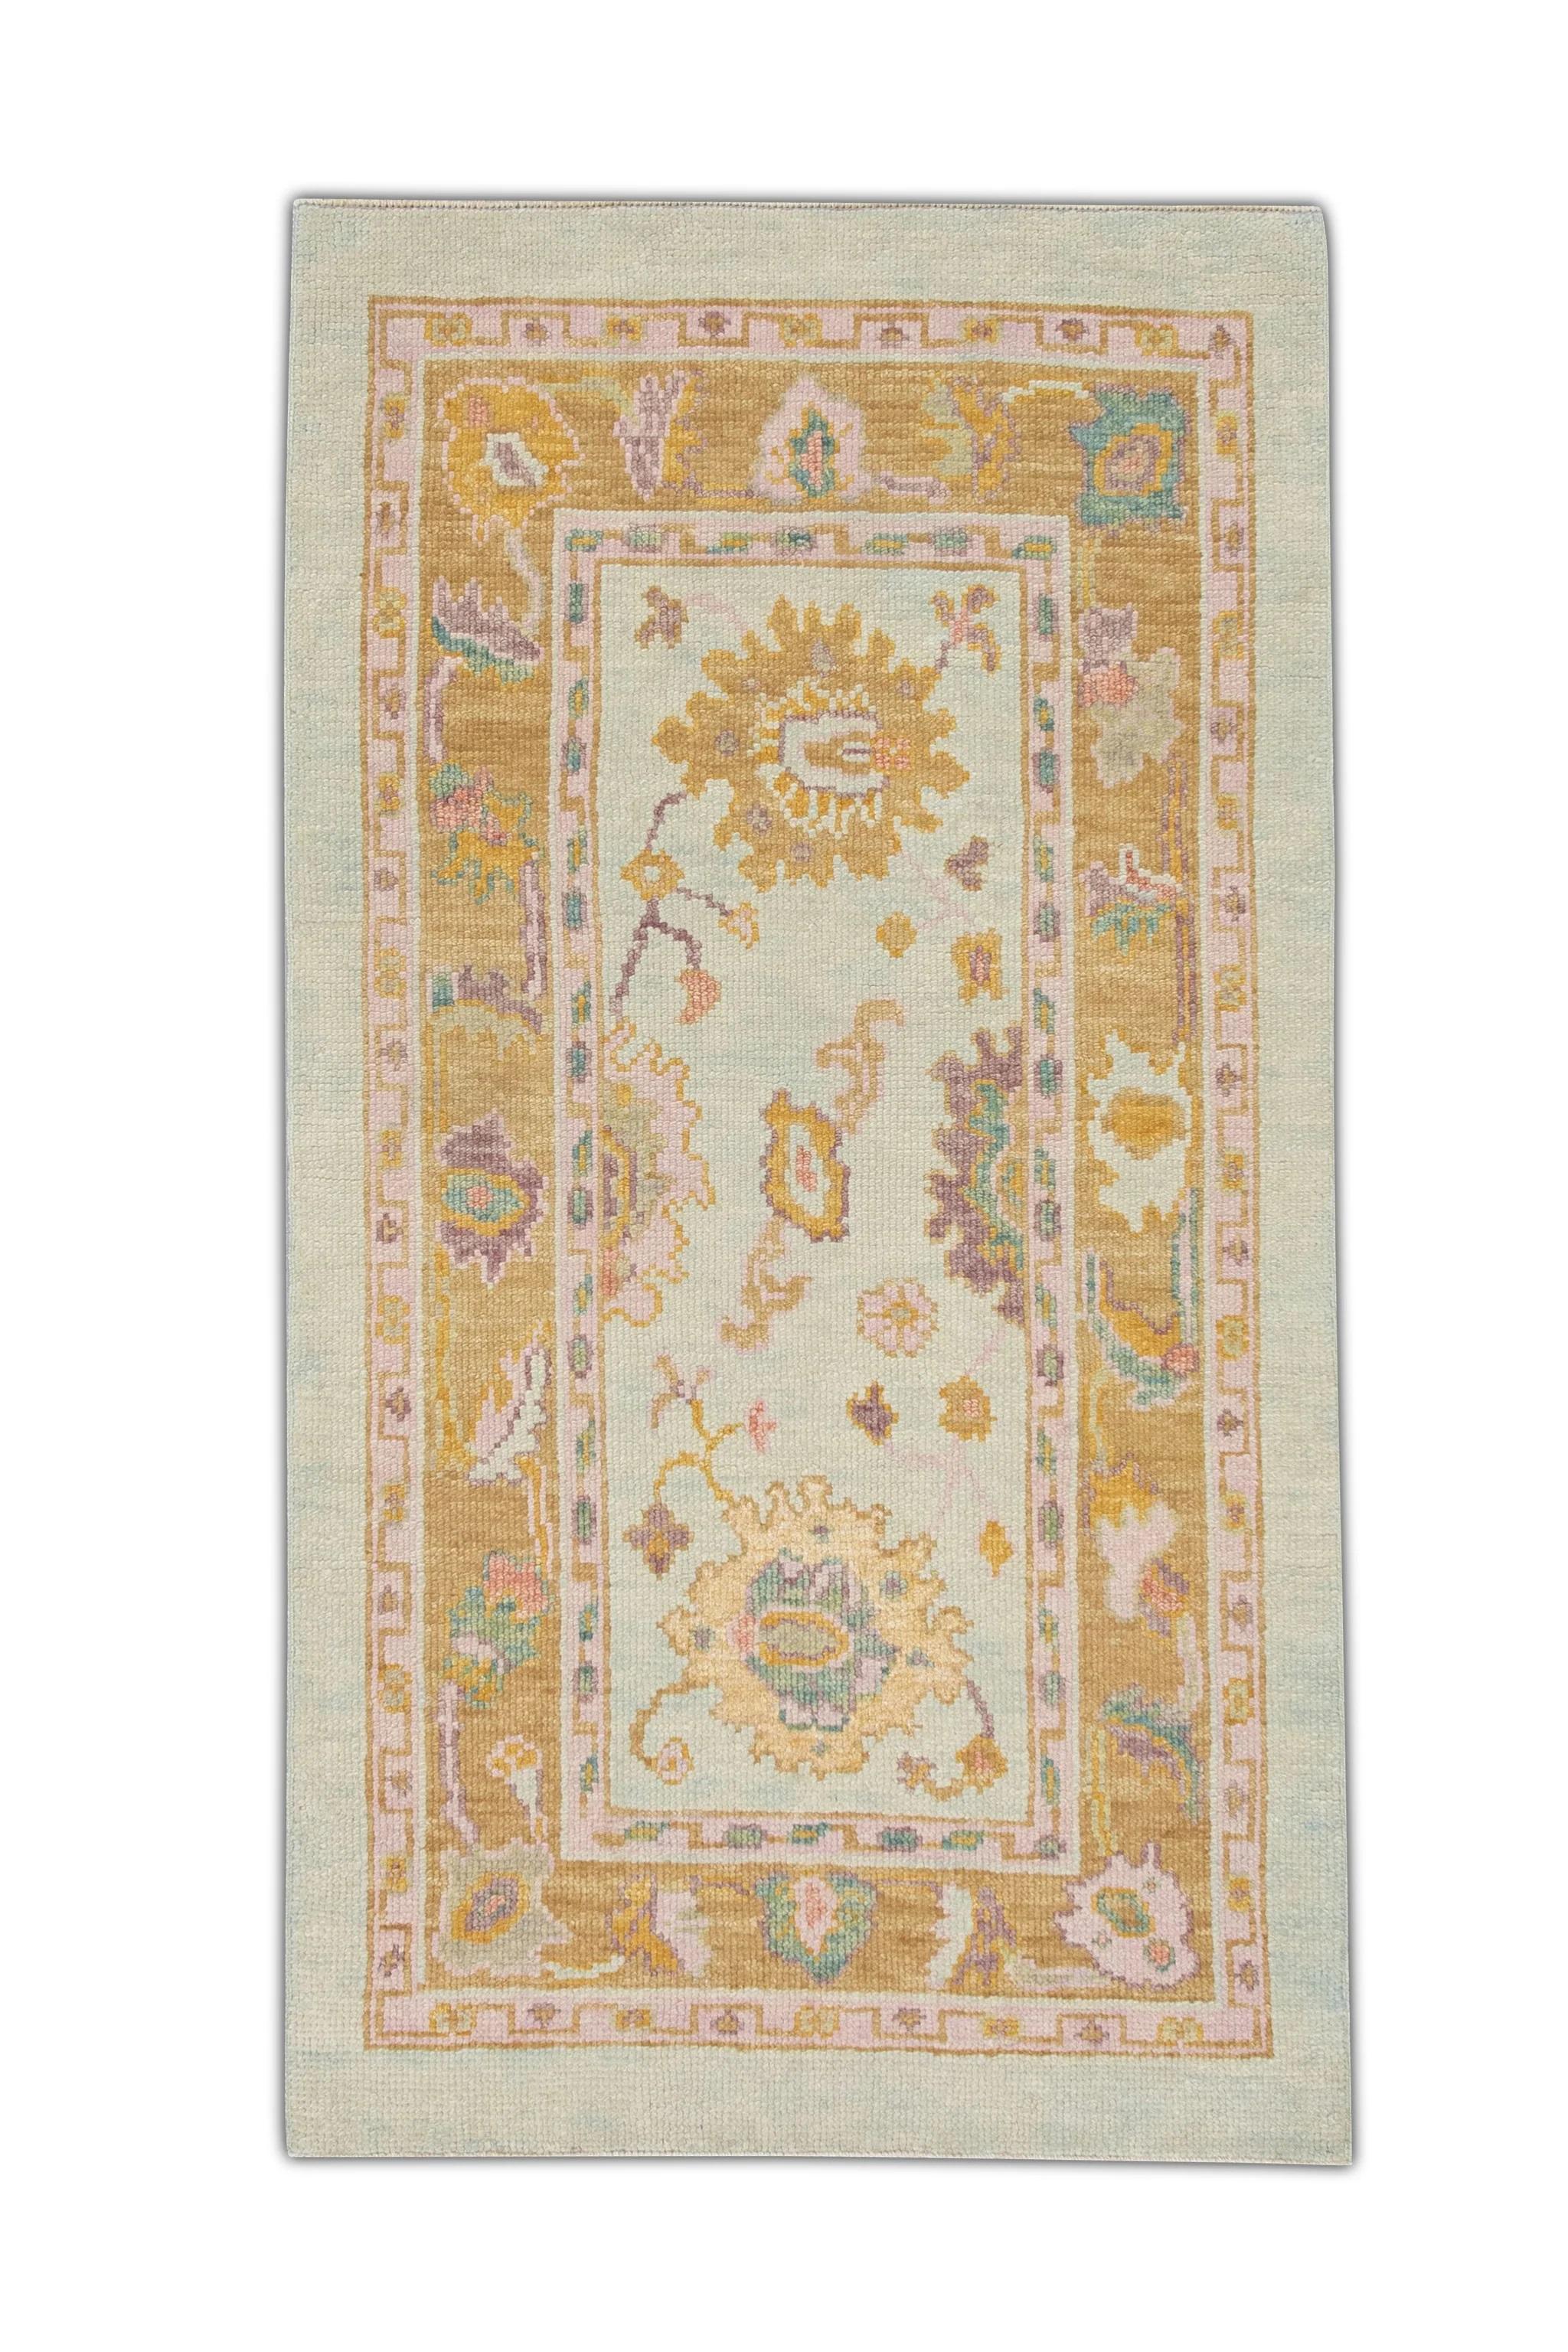 Handwoven Turkish Oushak Rug with Colorful Floral Design 2'10